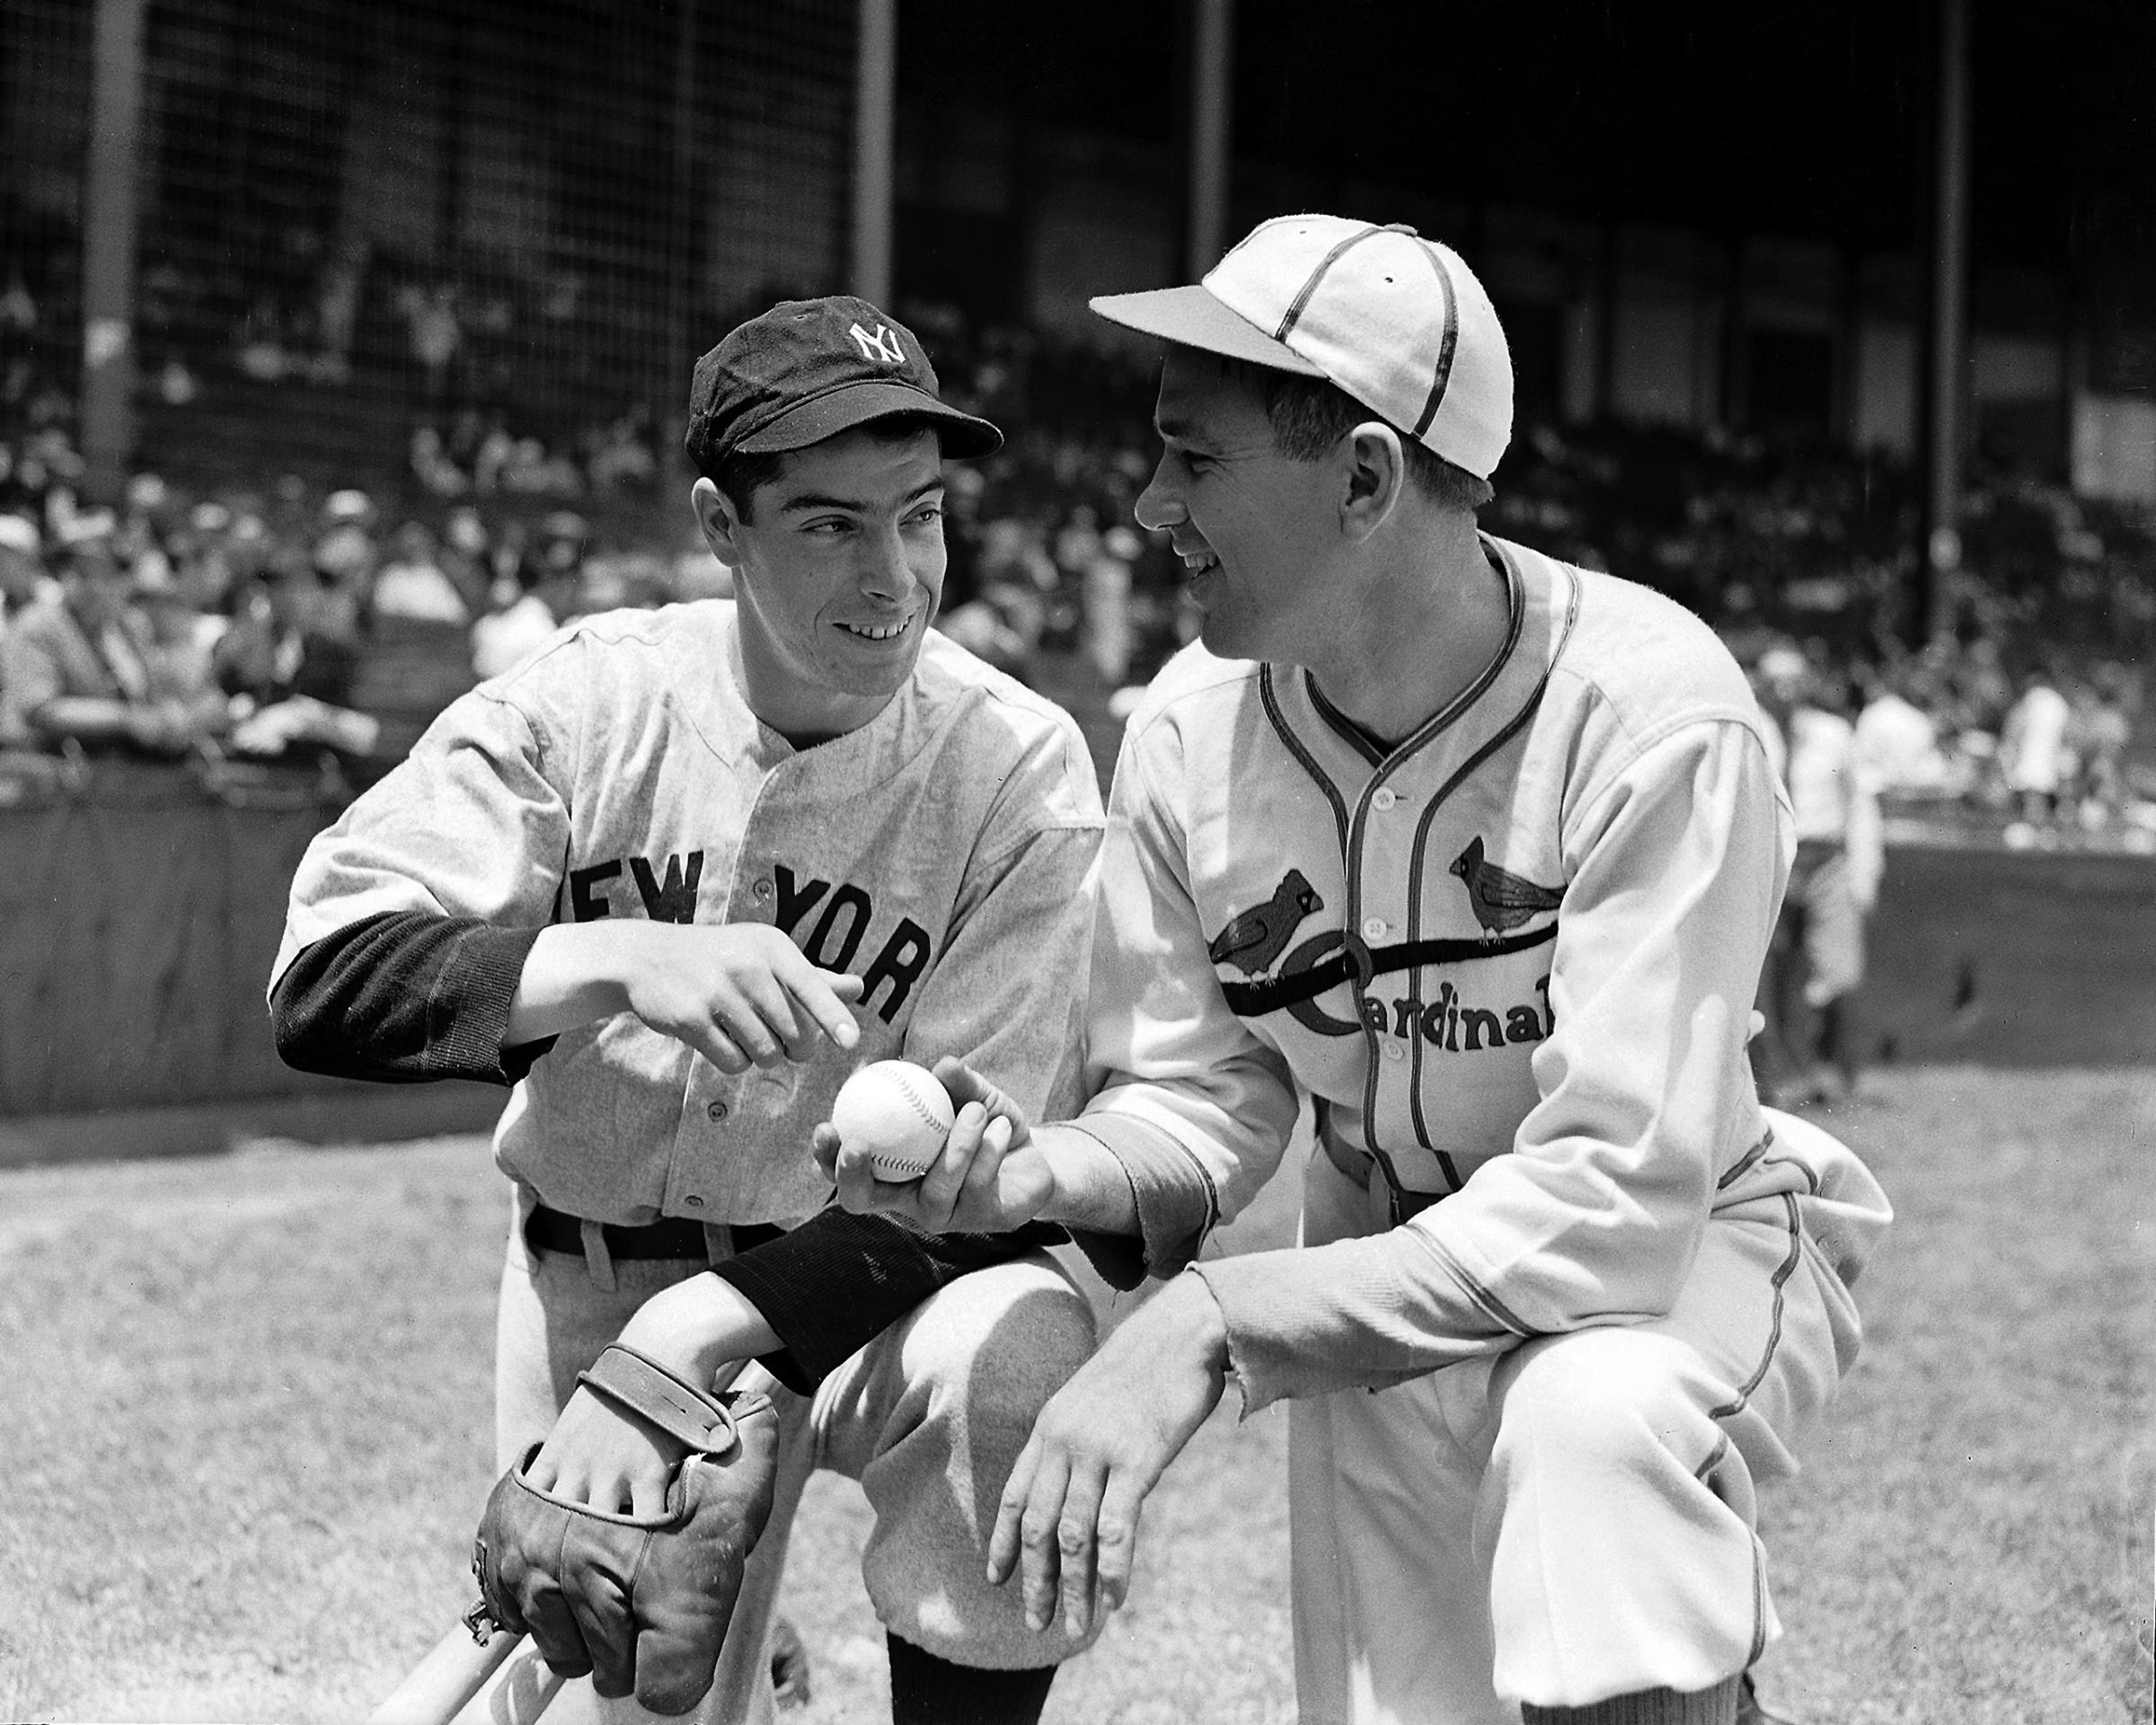 Yankees rookie Joe DiMaggio meets with Cardinals pitcher Dizzy Dean at the All-Star Game in Boston July 7, 1936.